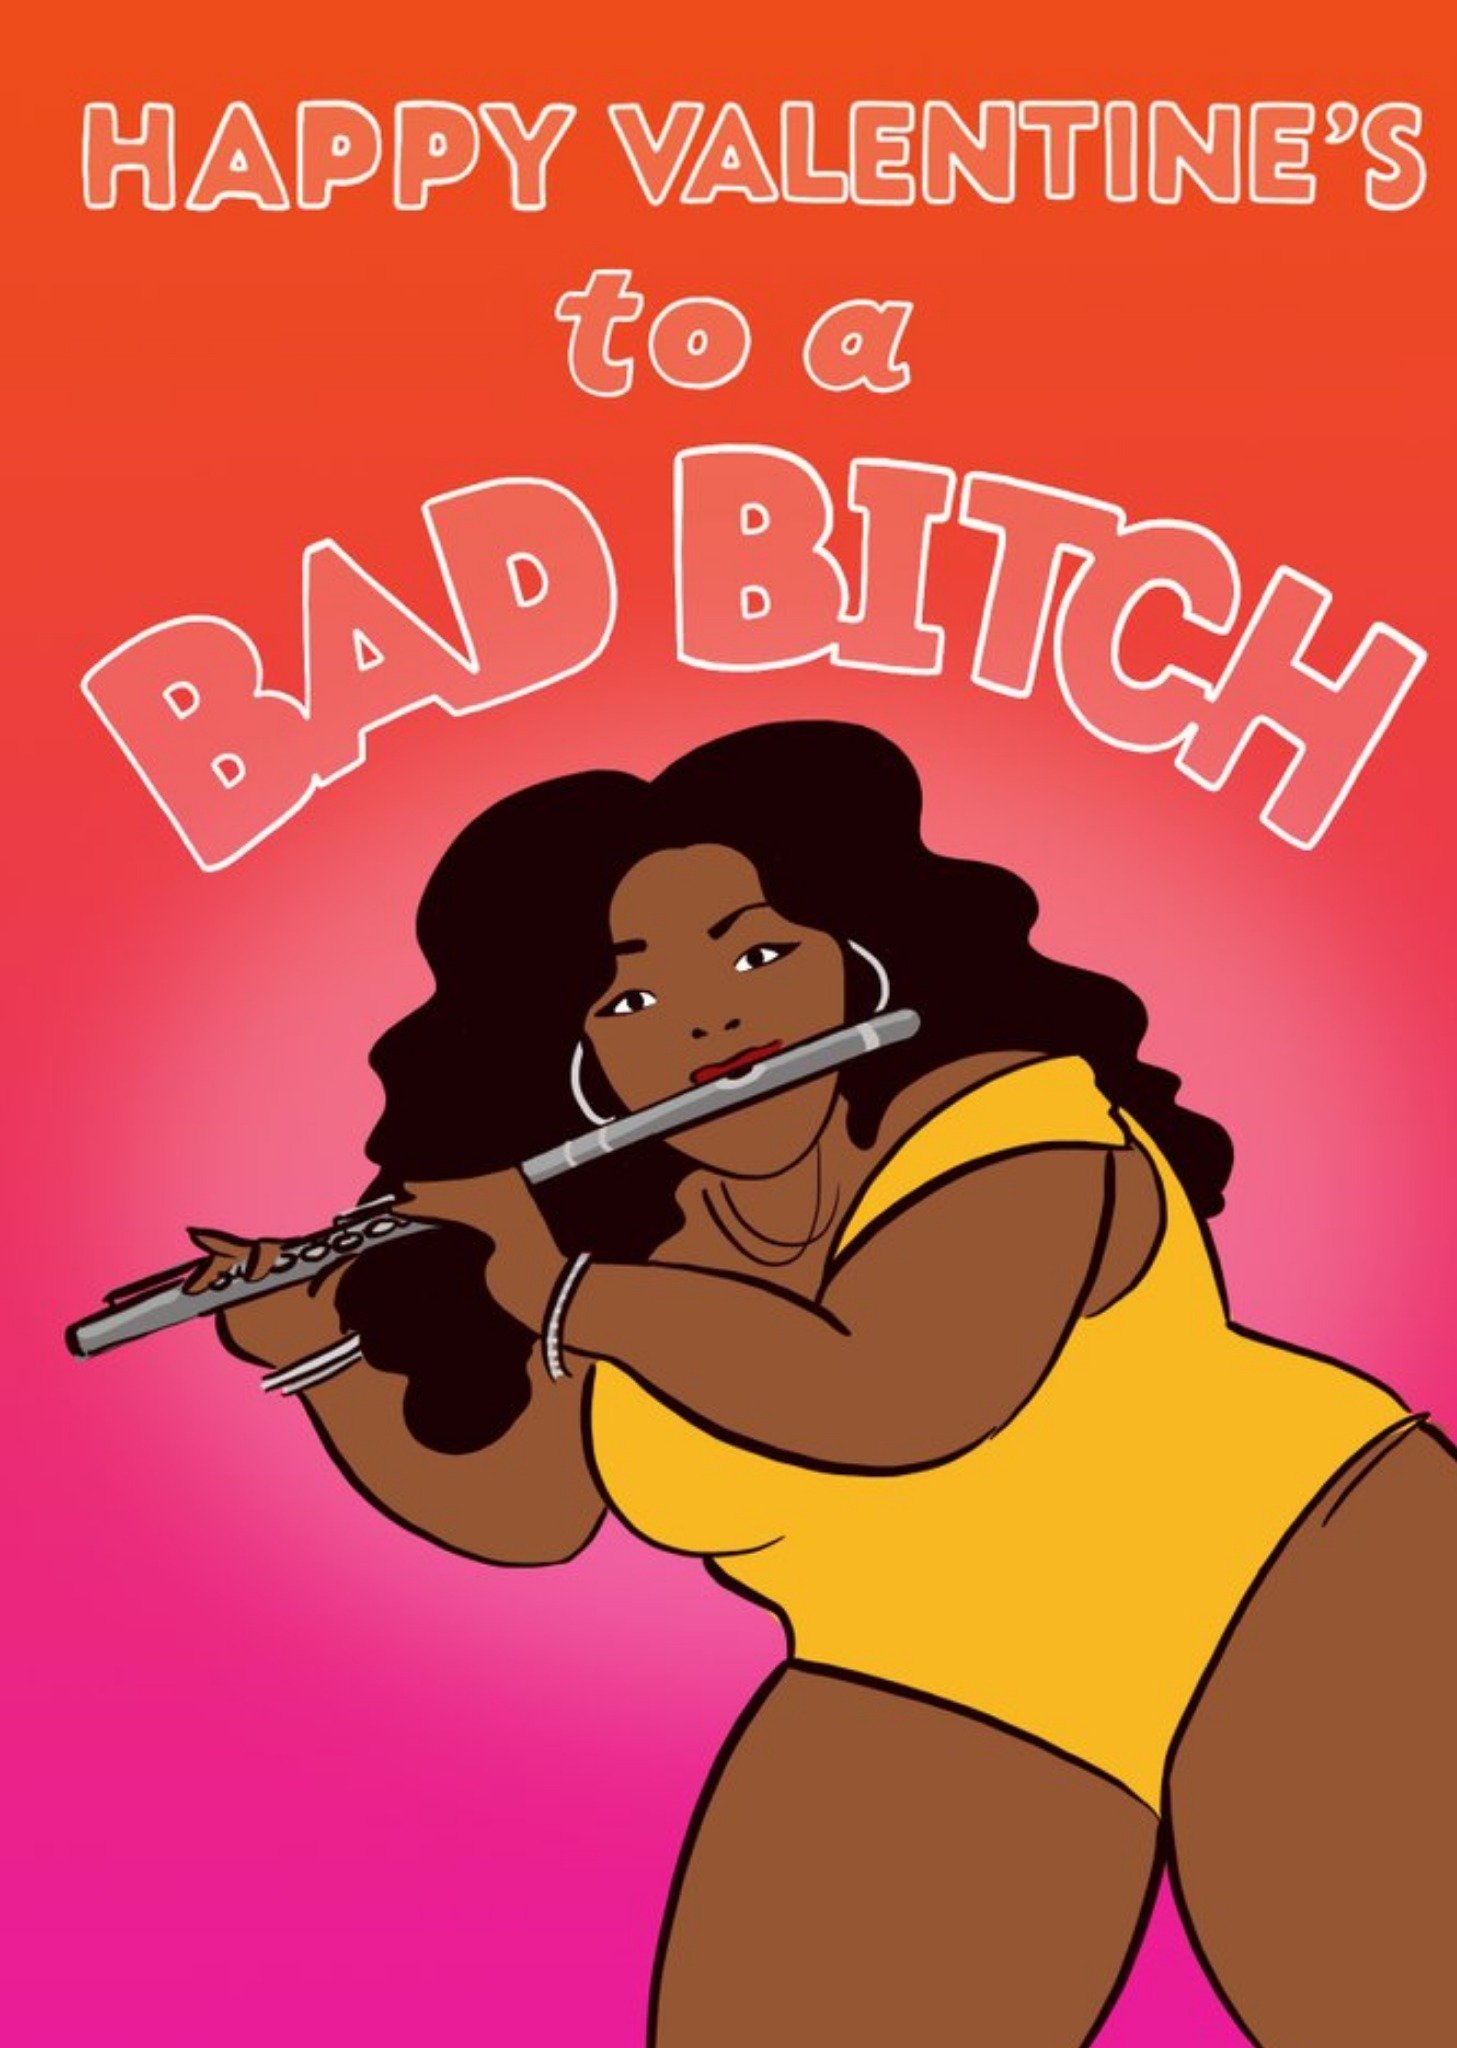 Moonpig Funny Topical Lizzo Bad Bitch Valentine's Day Card Ecard